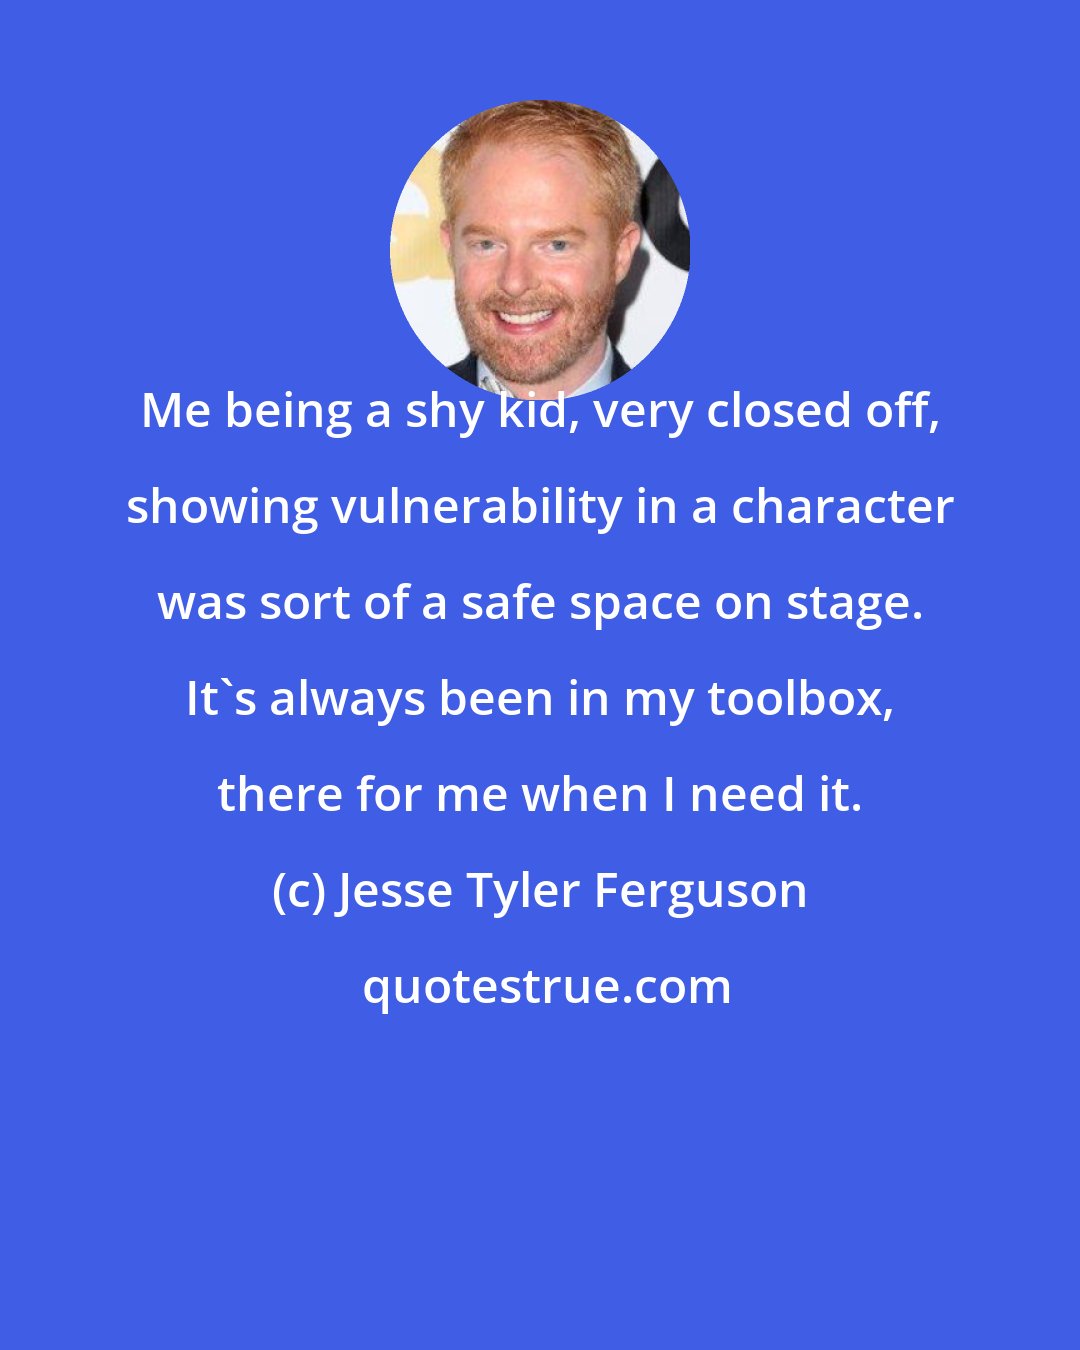 Jesse Tyler Ferguson: Me being a shy kid, very closed off, showing vulnerability in a character was sort of a safe space on stage. It's always been in my toolbox, there for me when I need it.